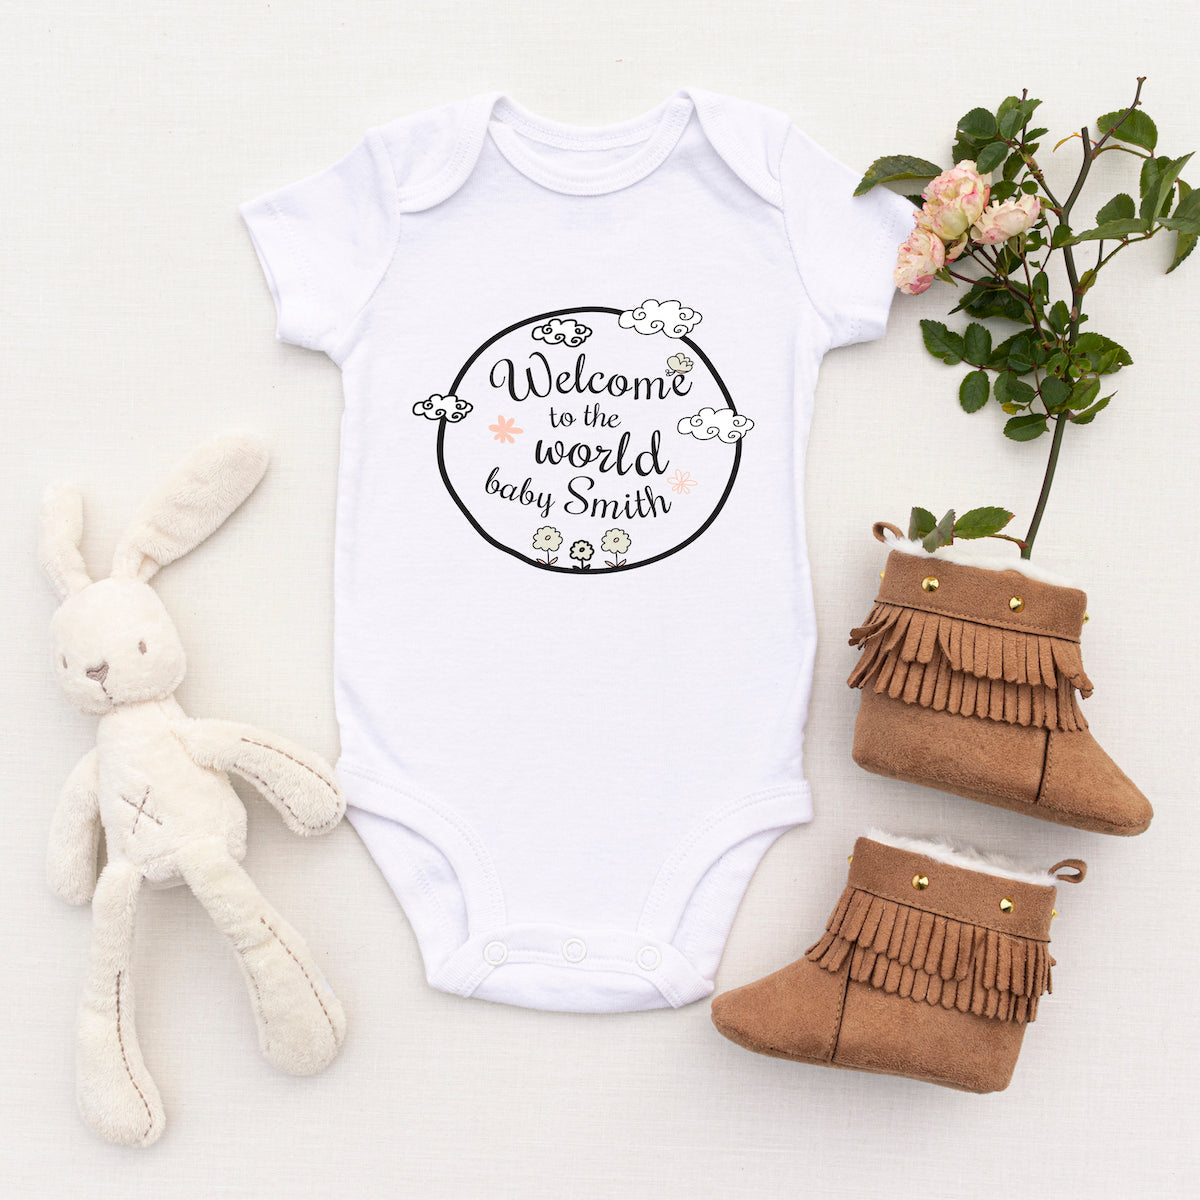 Personalised White Baby Body Suit Grow Vest - Round Text